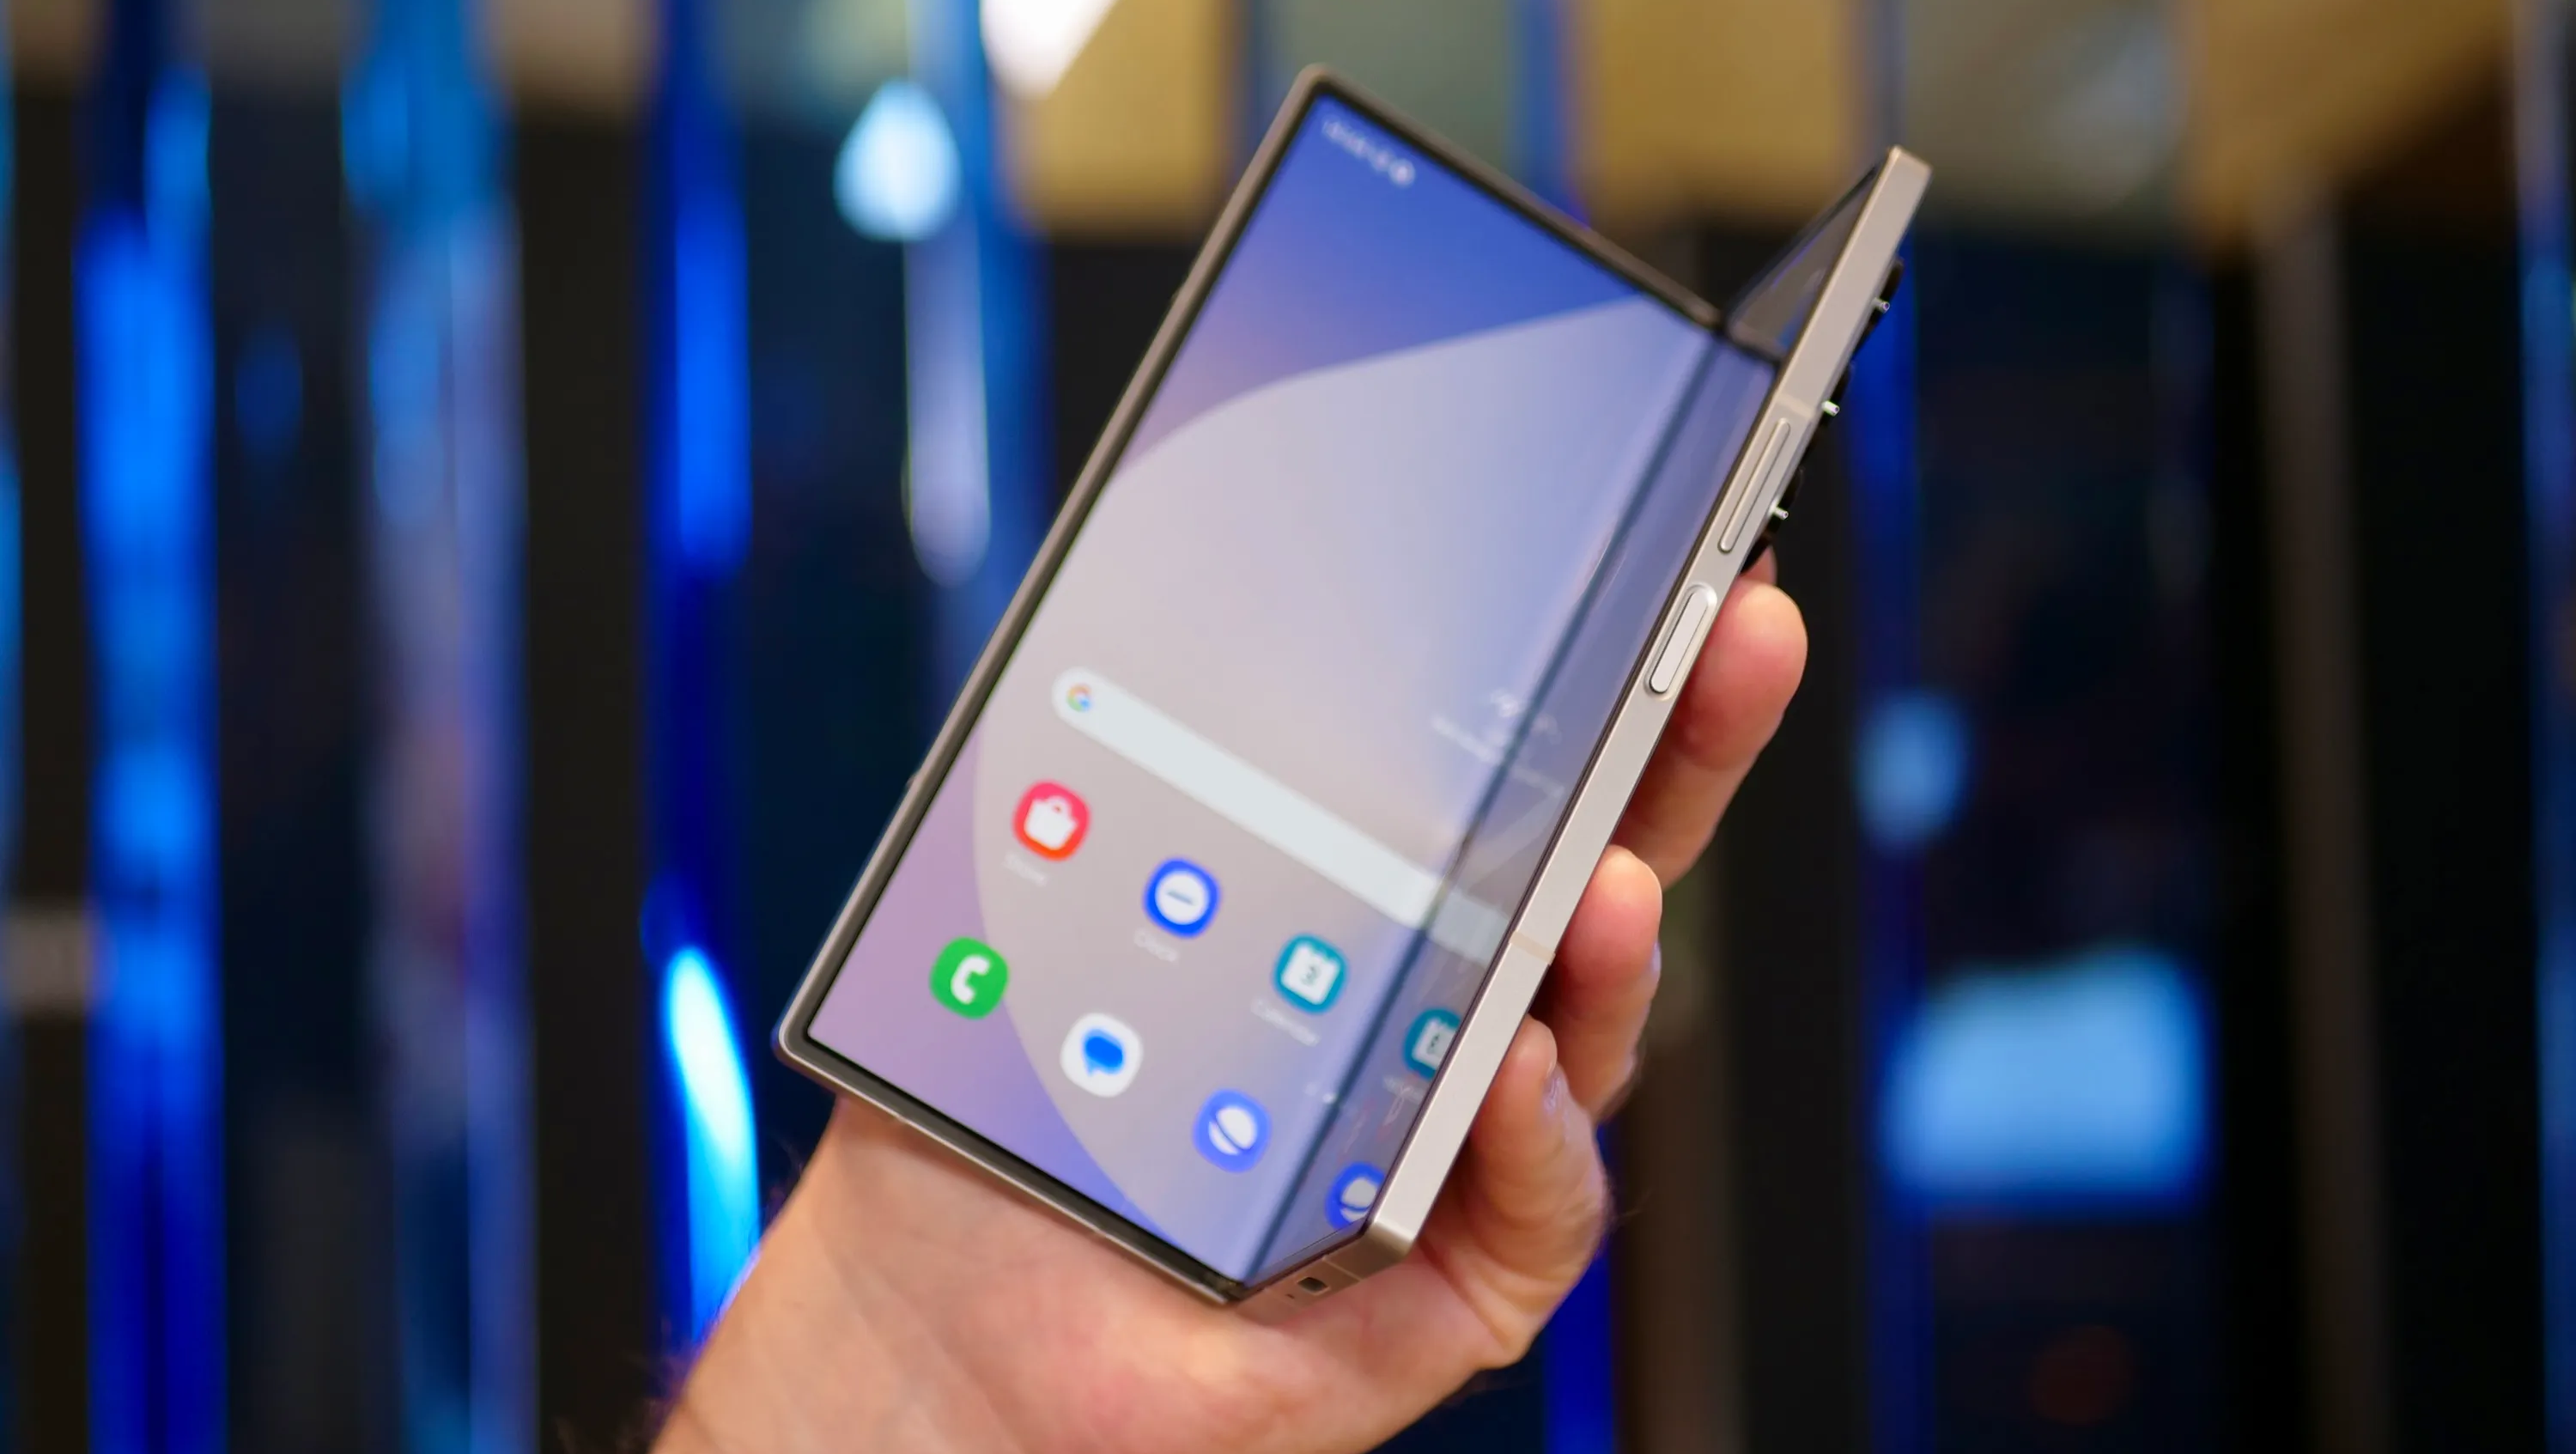 Samsung aims to make the next generation of foldable smartphones as thin as the Galaxy S series